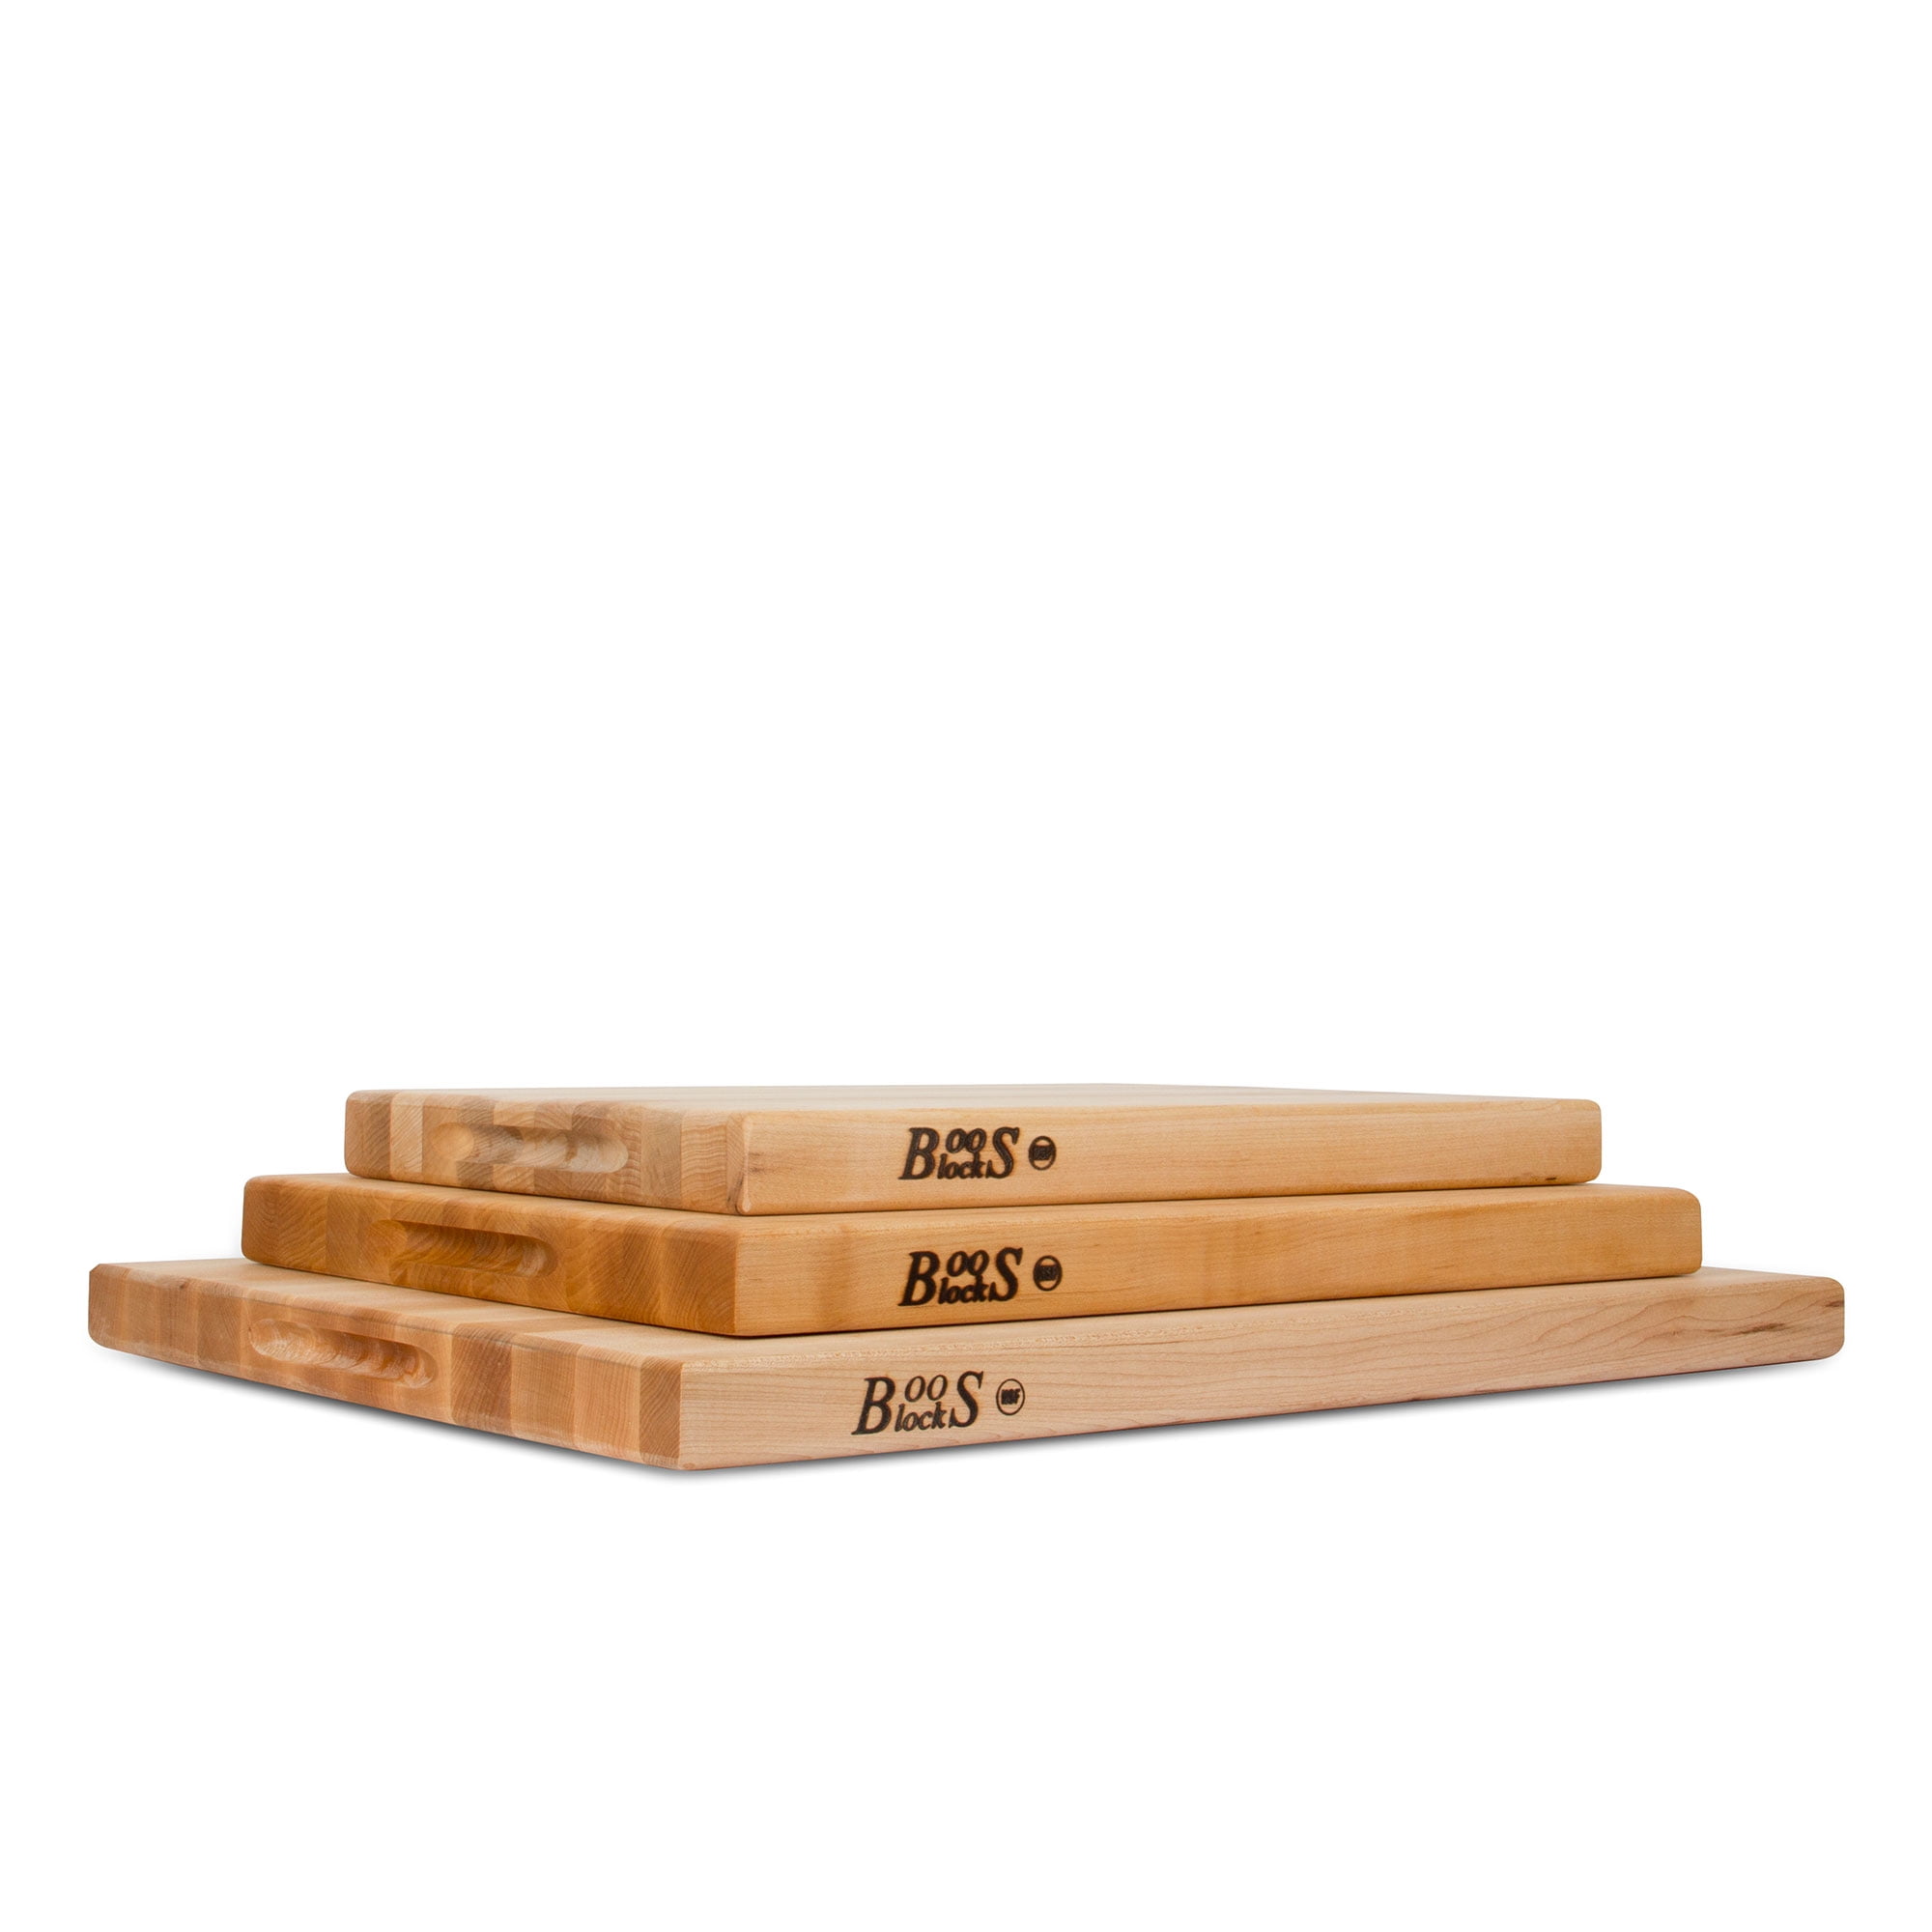 Boos Walnut Square Cutting Board With Stainless Feet 1-1/2 Thick 12x12x1.5